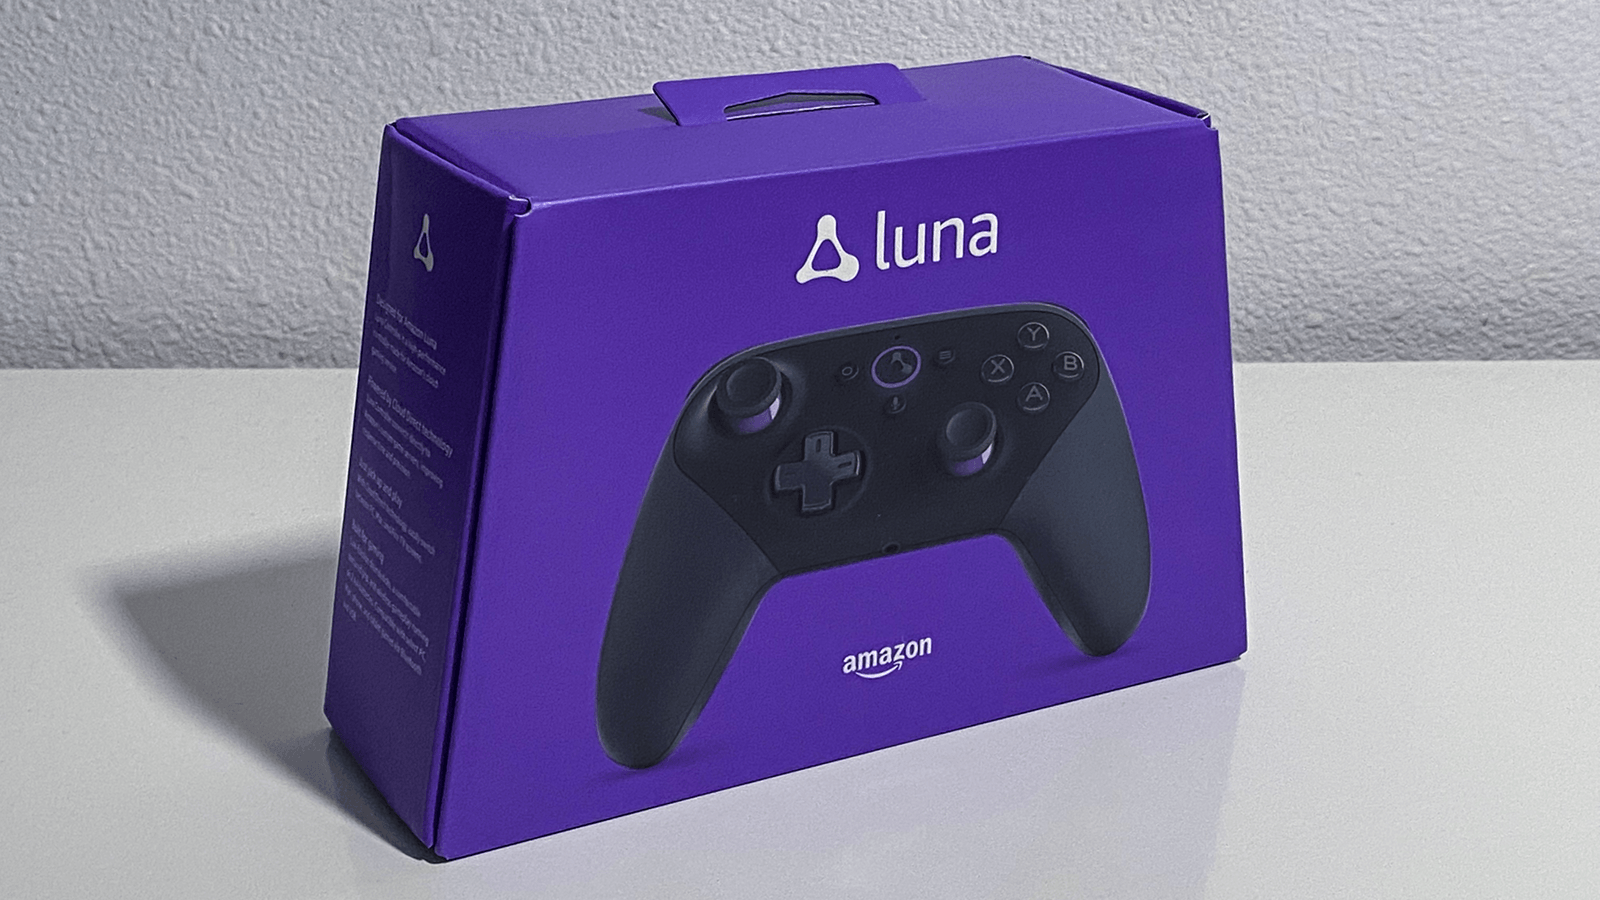 Amazon Luna is Offering Members an Exclusive Fortnite Reward Starting Today on Fire TV & More